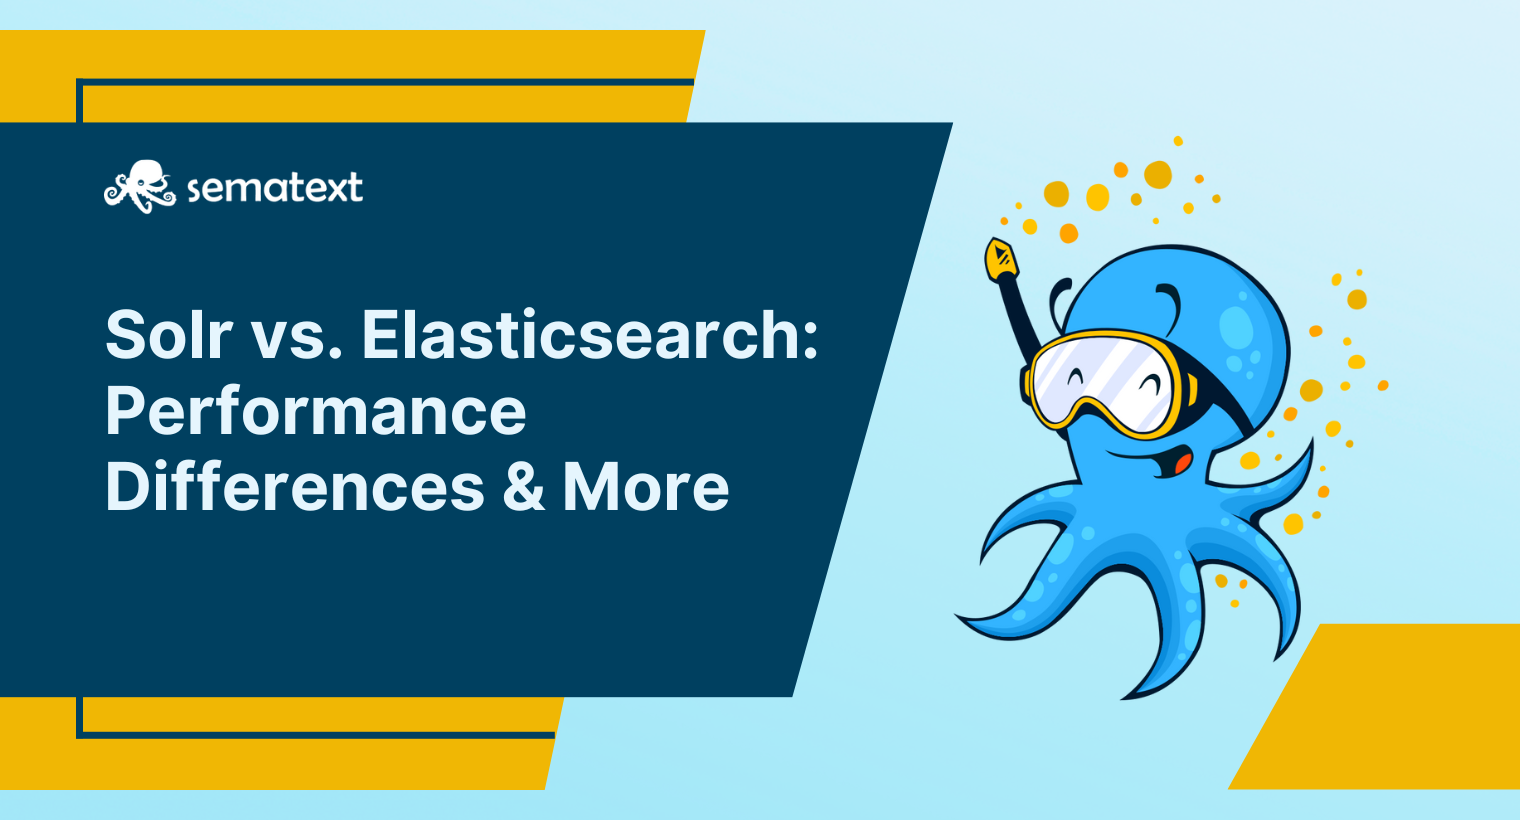 Solr vs Elasticsearch: Performance Differences & More. How to Decide Which One Is Best for You